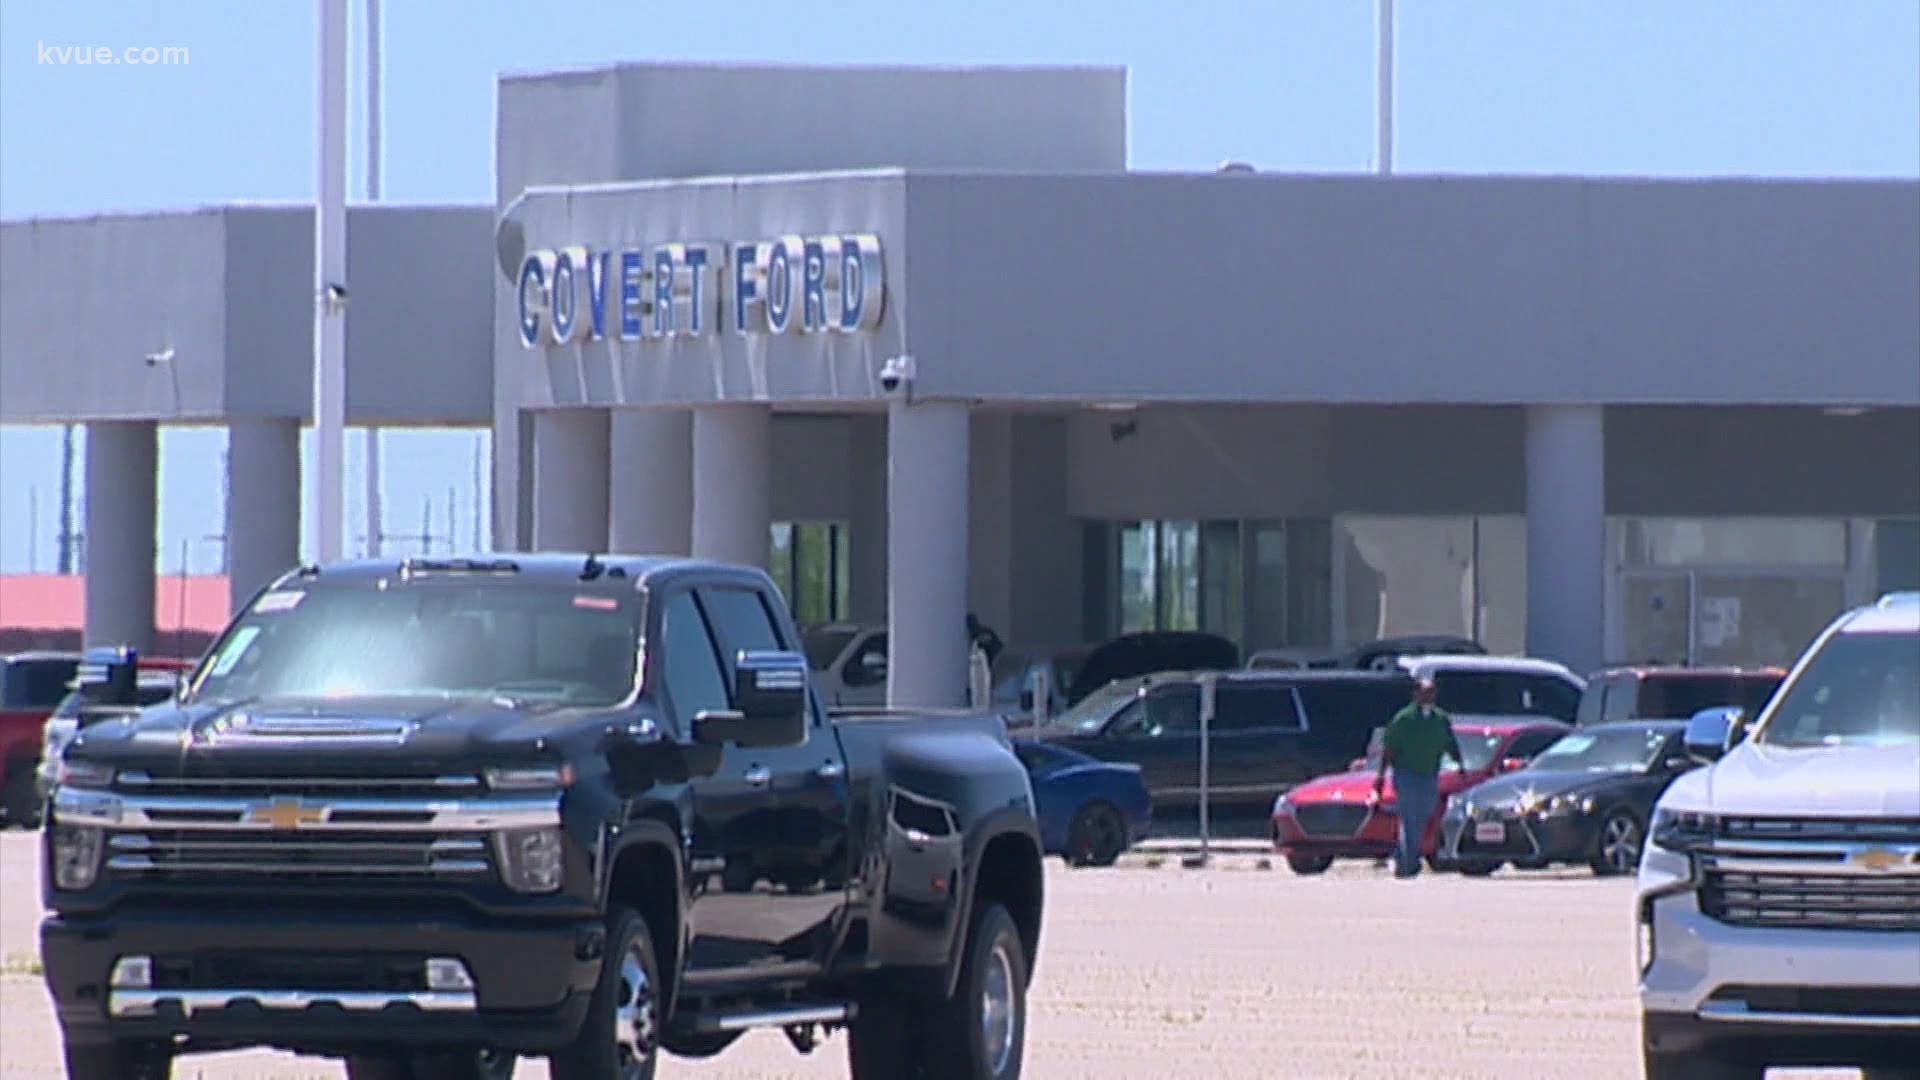 The employees are accused of illegally selling guns, sometimes at the dealership itself.